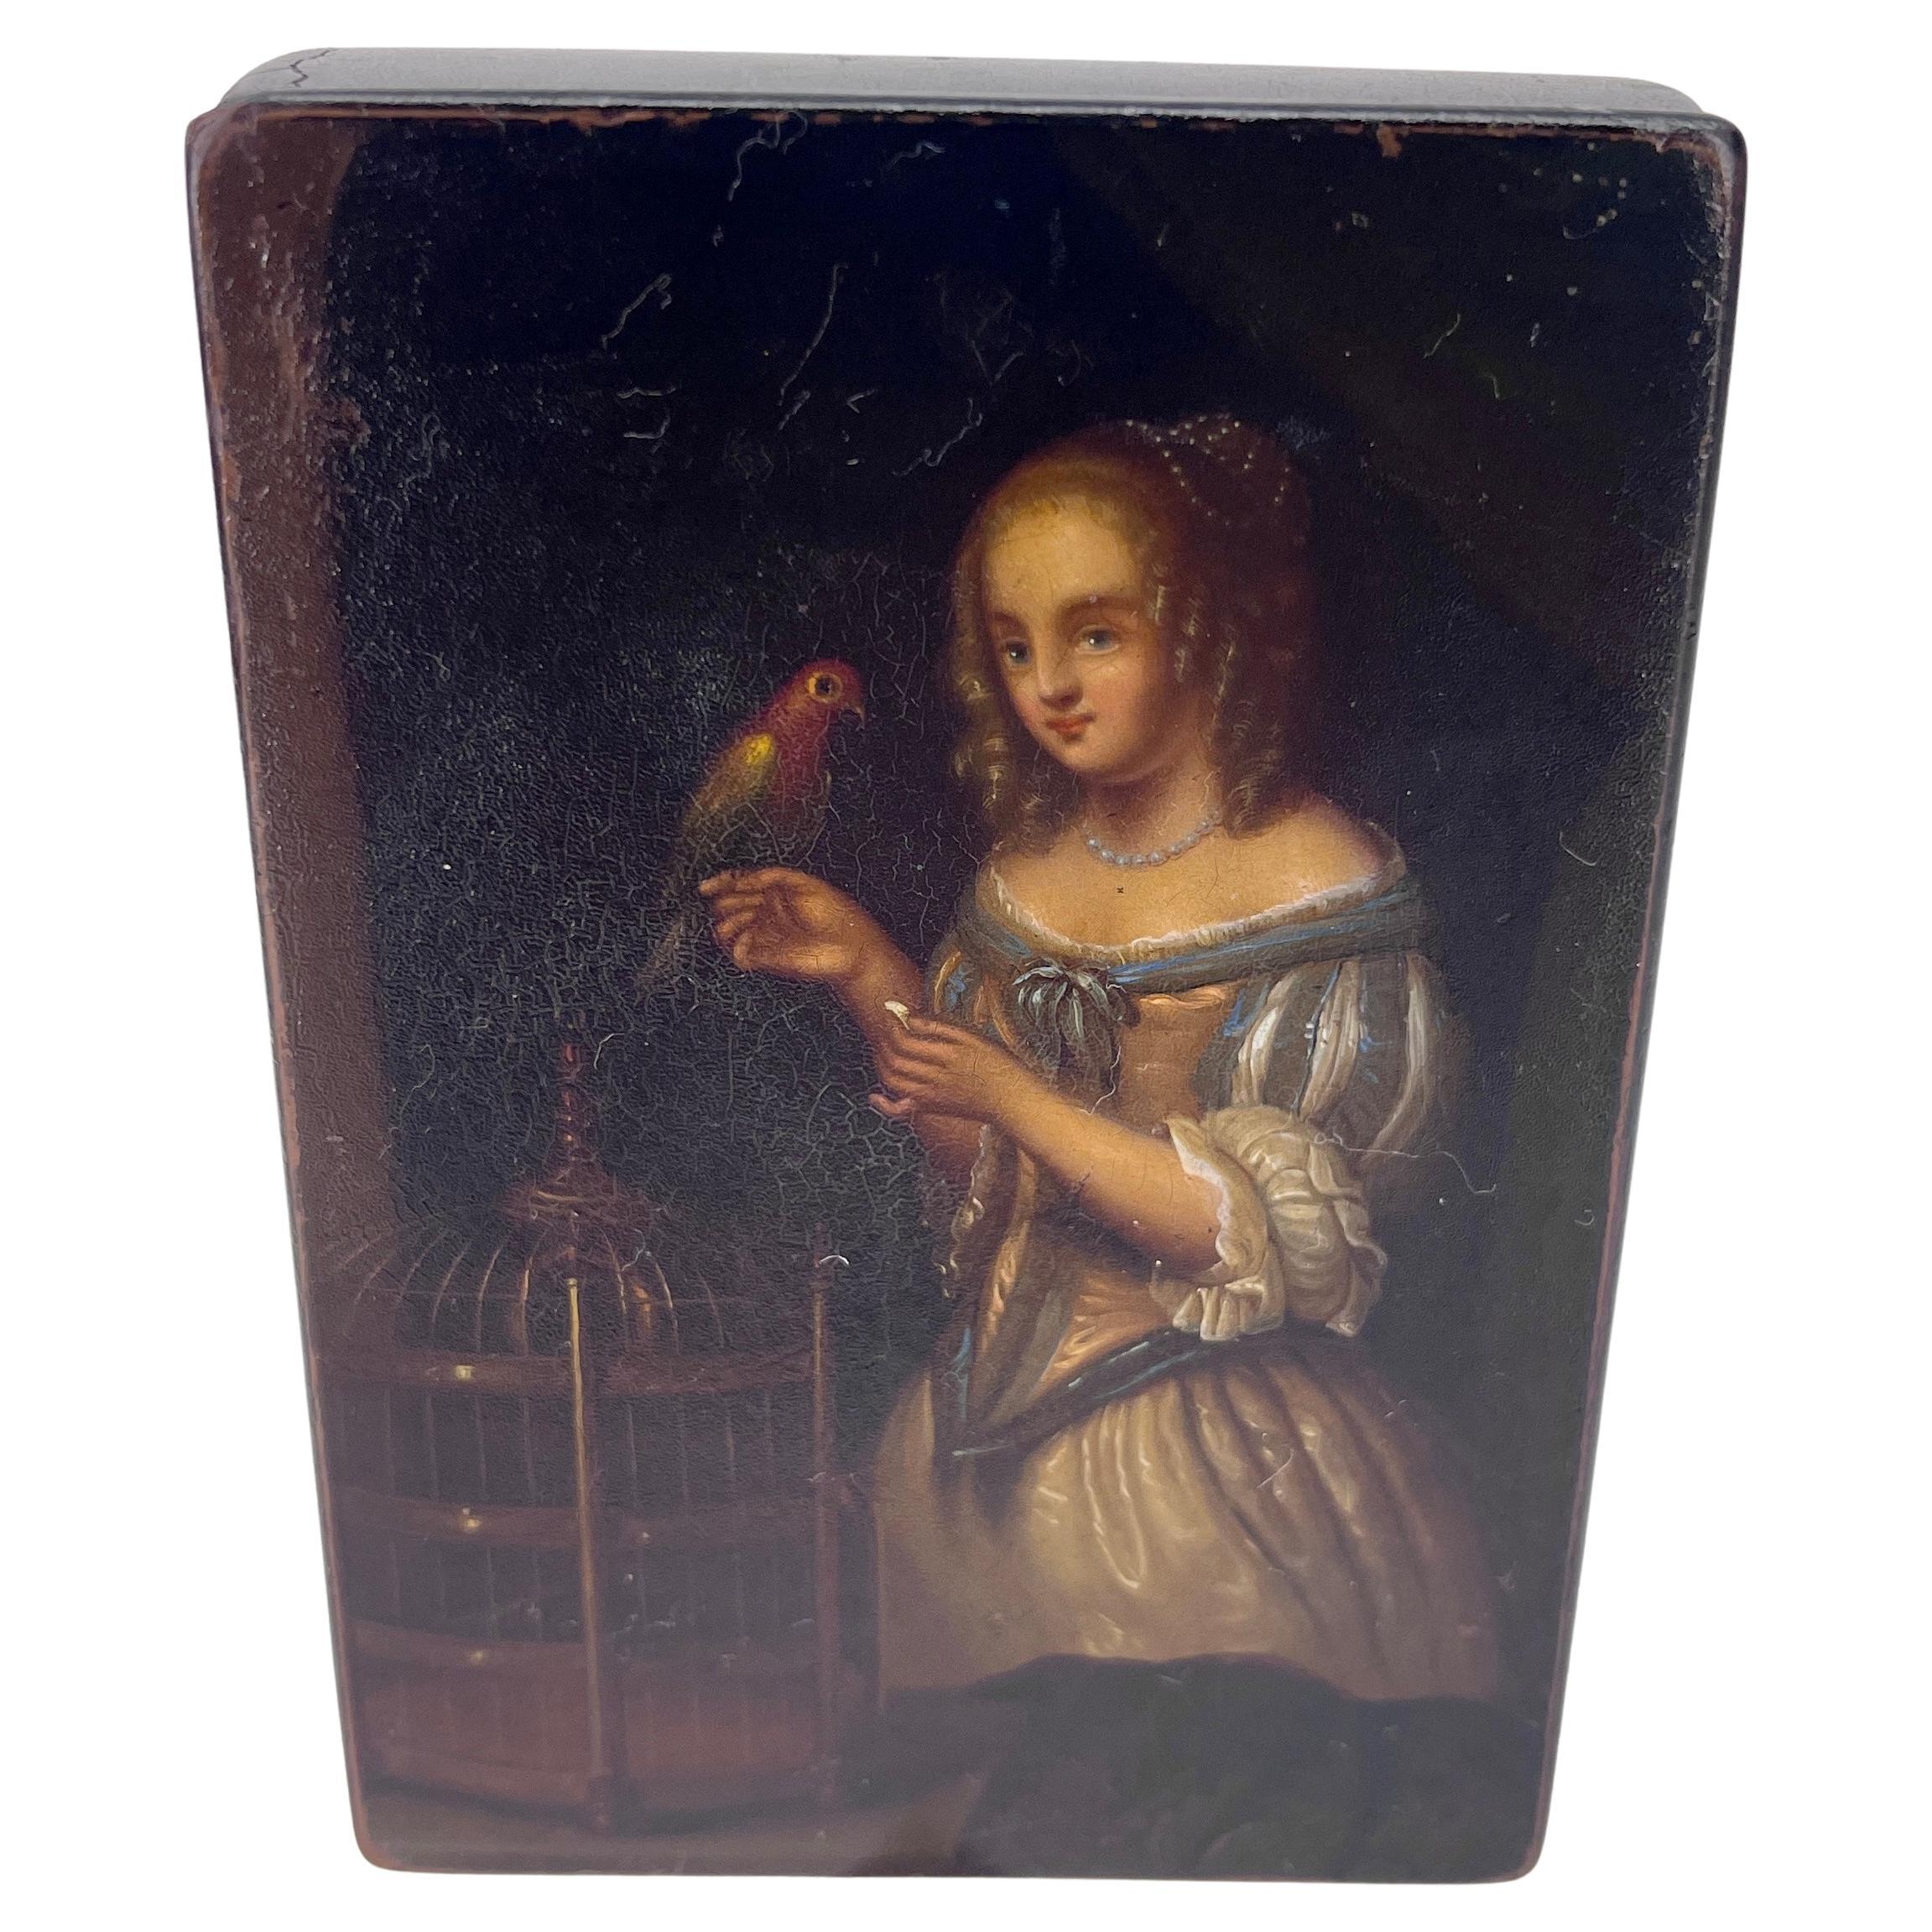 Early 19th century hand painted black lacquered Papier-Mâché snuff box or vanity box
Crafted in Austria in the early 1800's, the decorative box features a hand painted scene of a young beauty holding a parrot in the romantic Rococo manner of